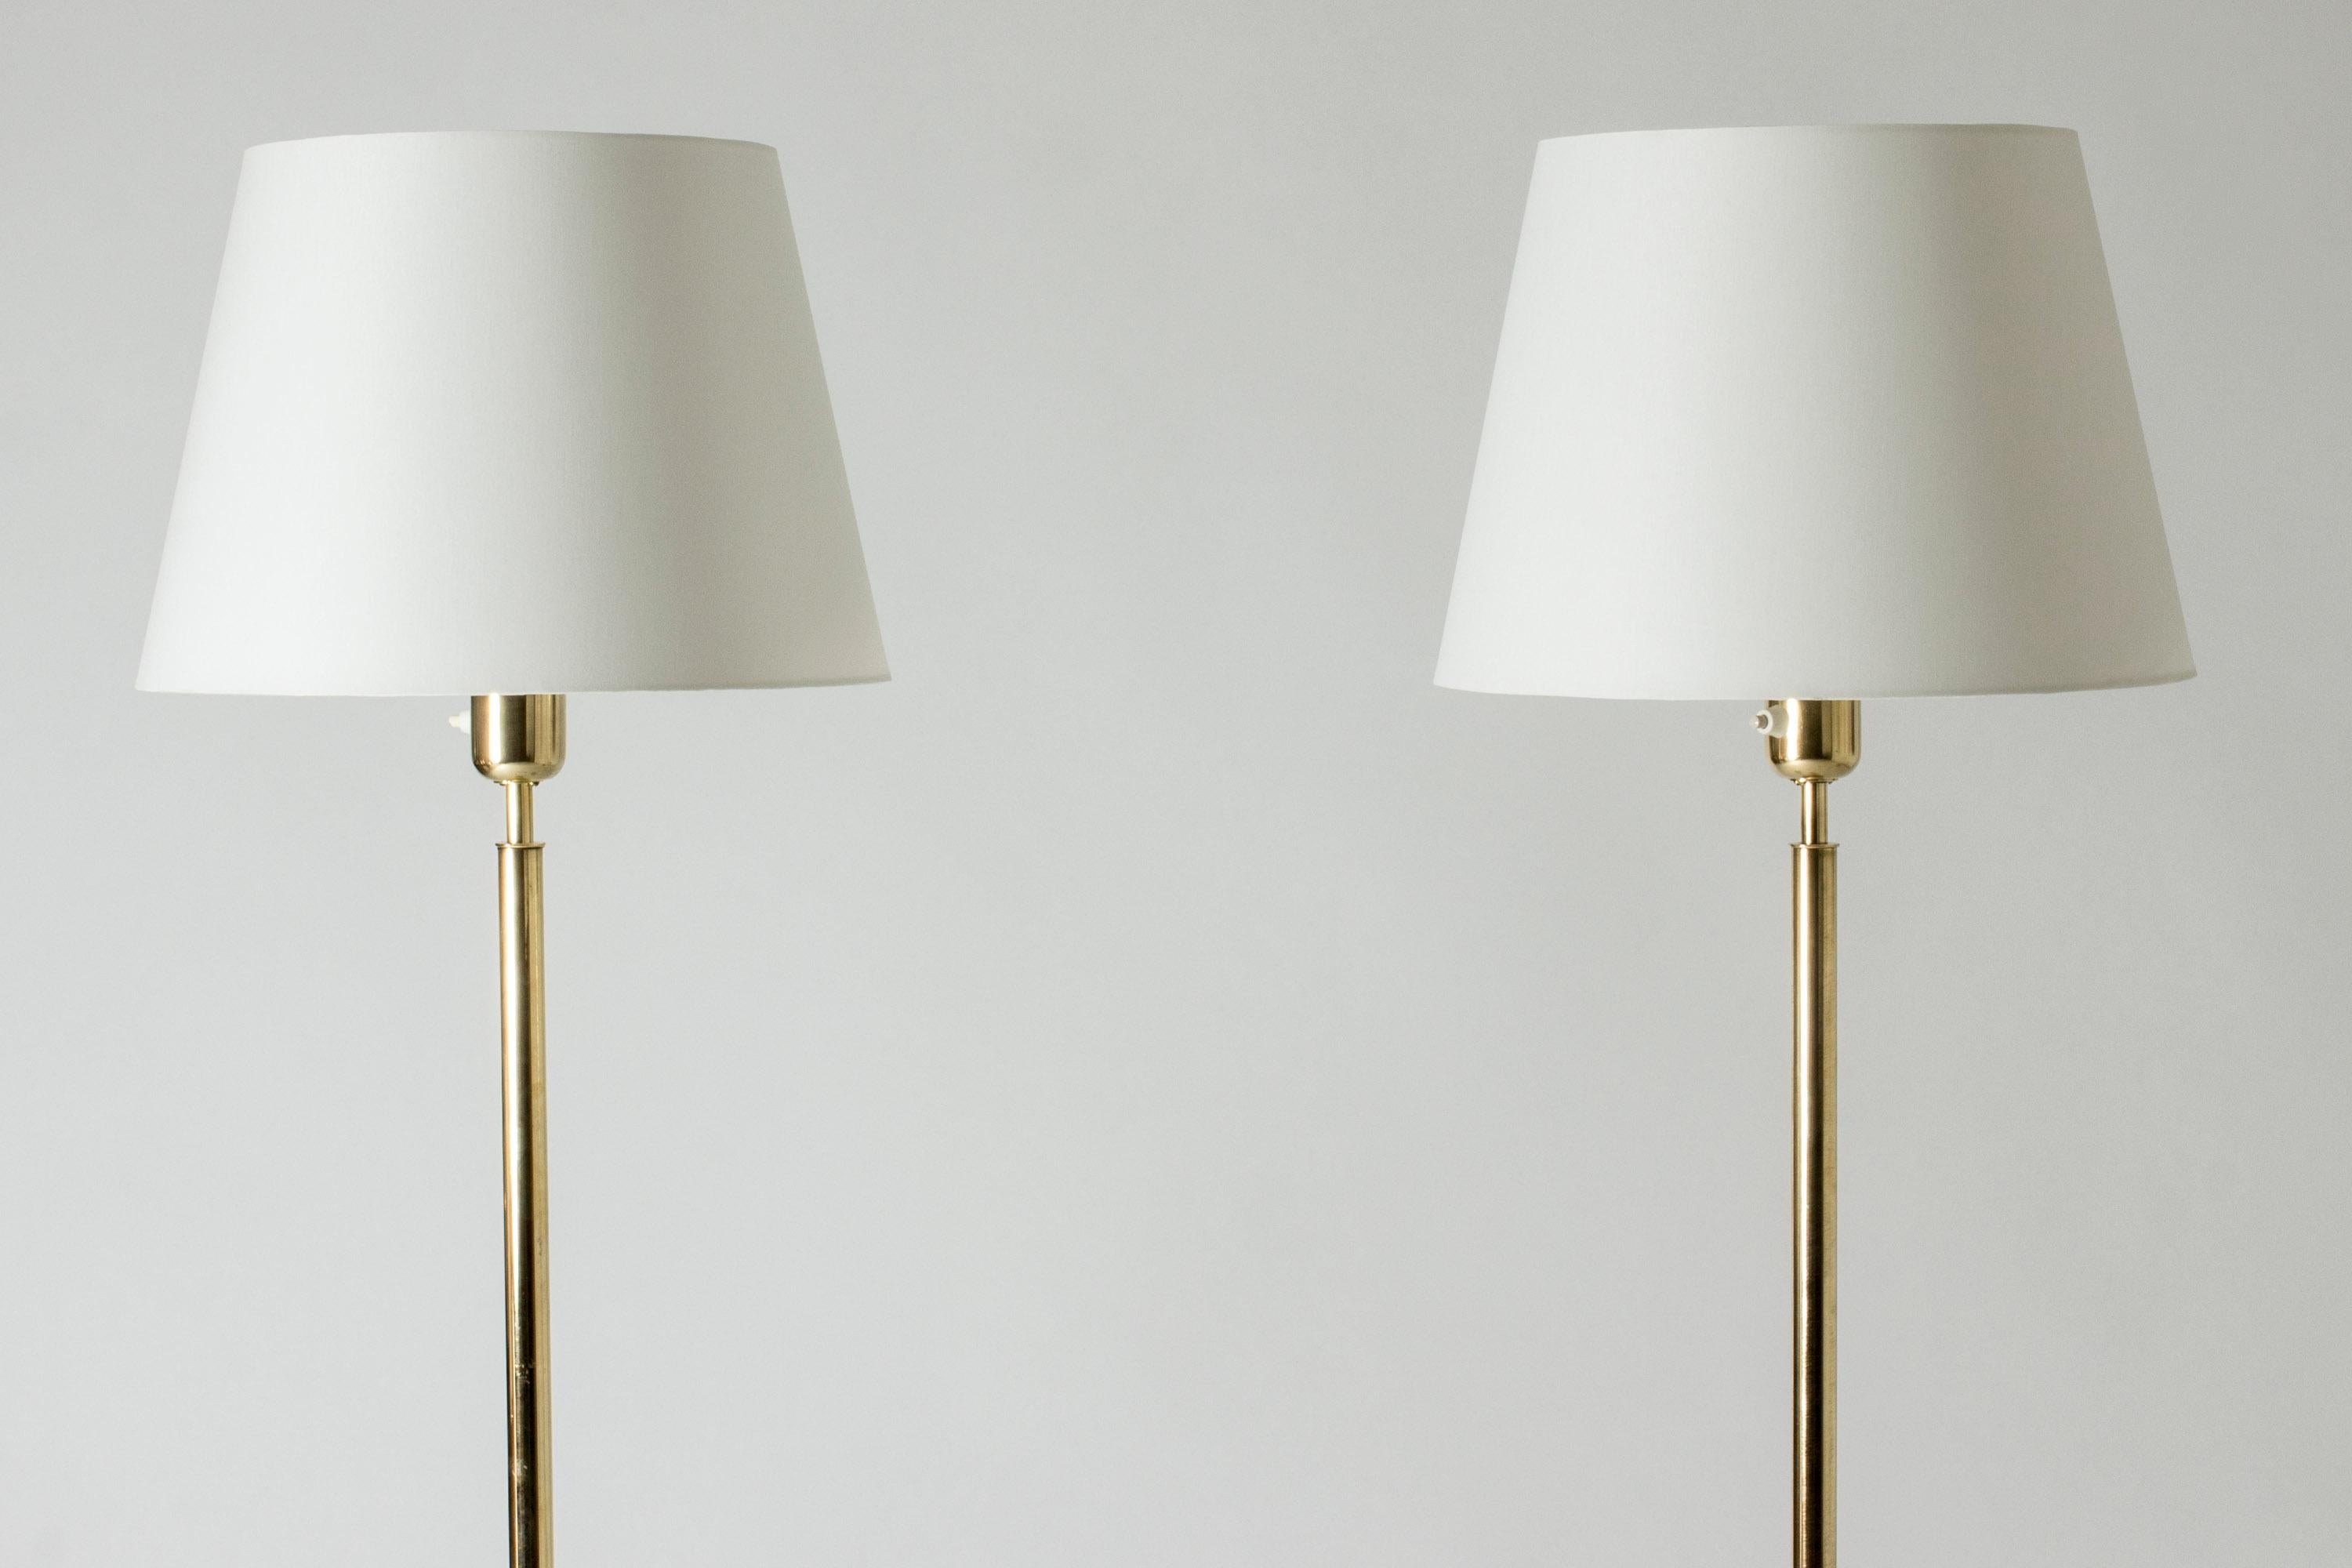 Pair of elegant floor lamps from ASEA, made from brass. Sleek lines, subtly luxurious look.